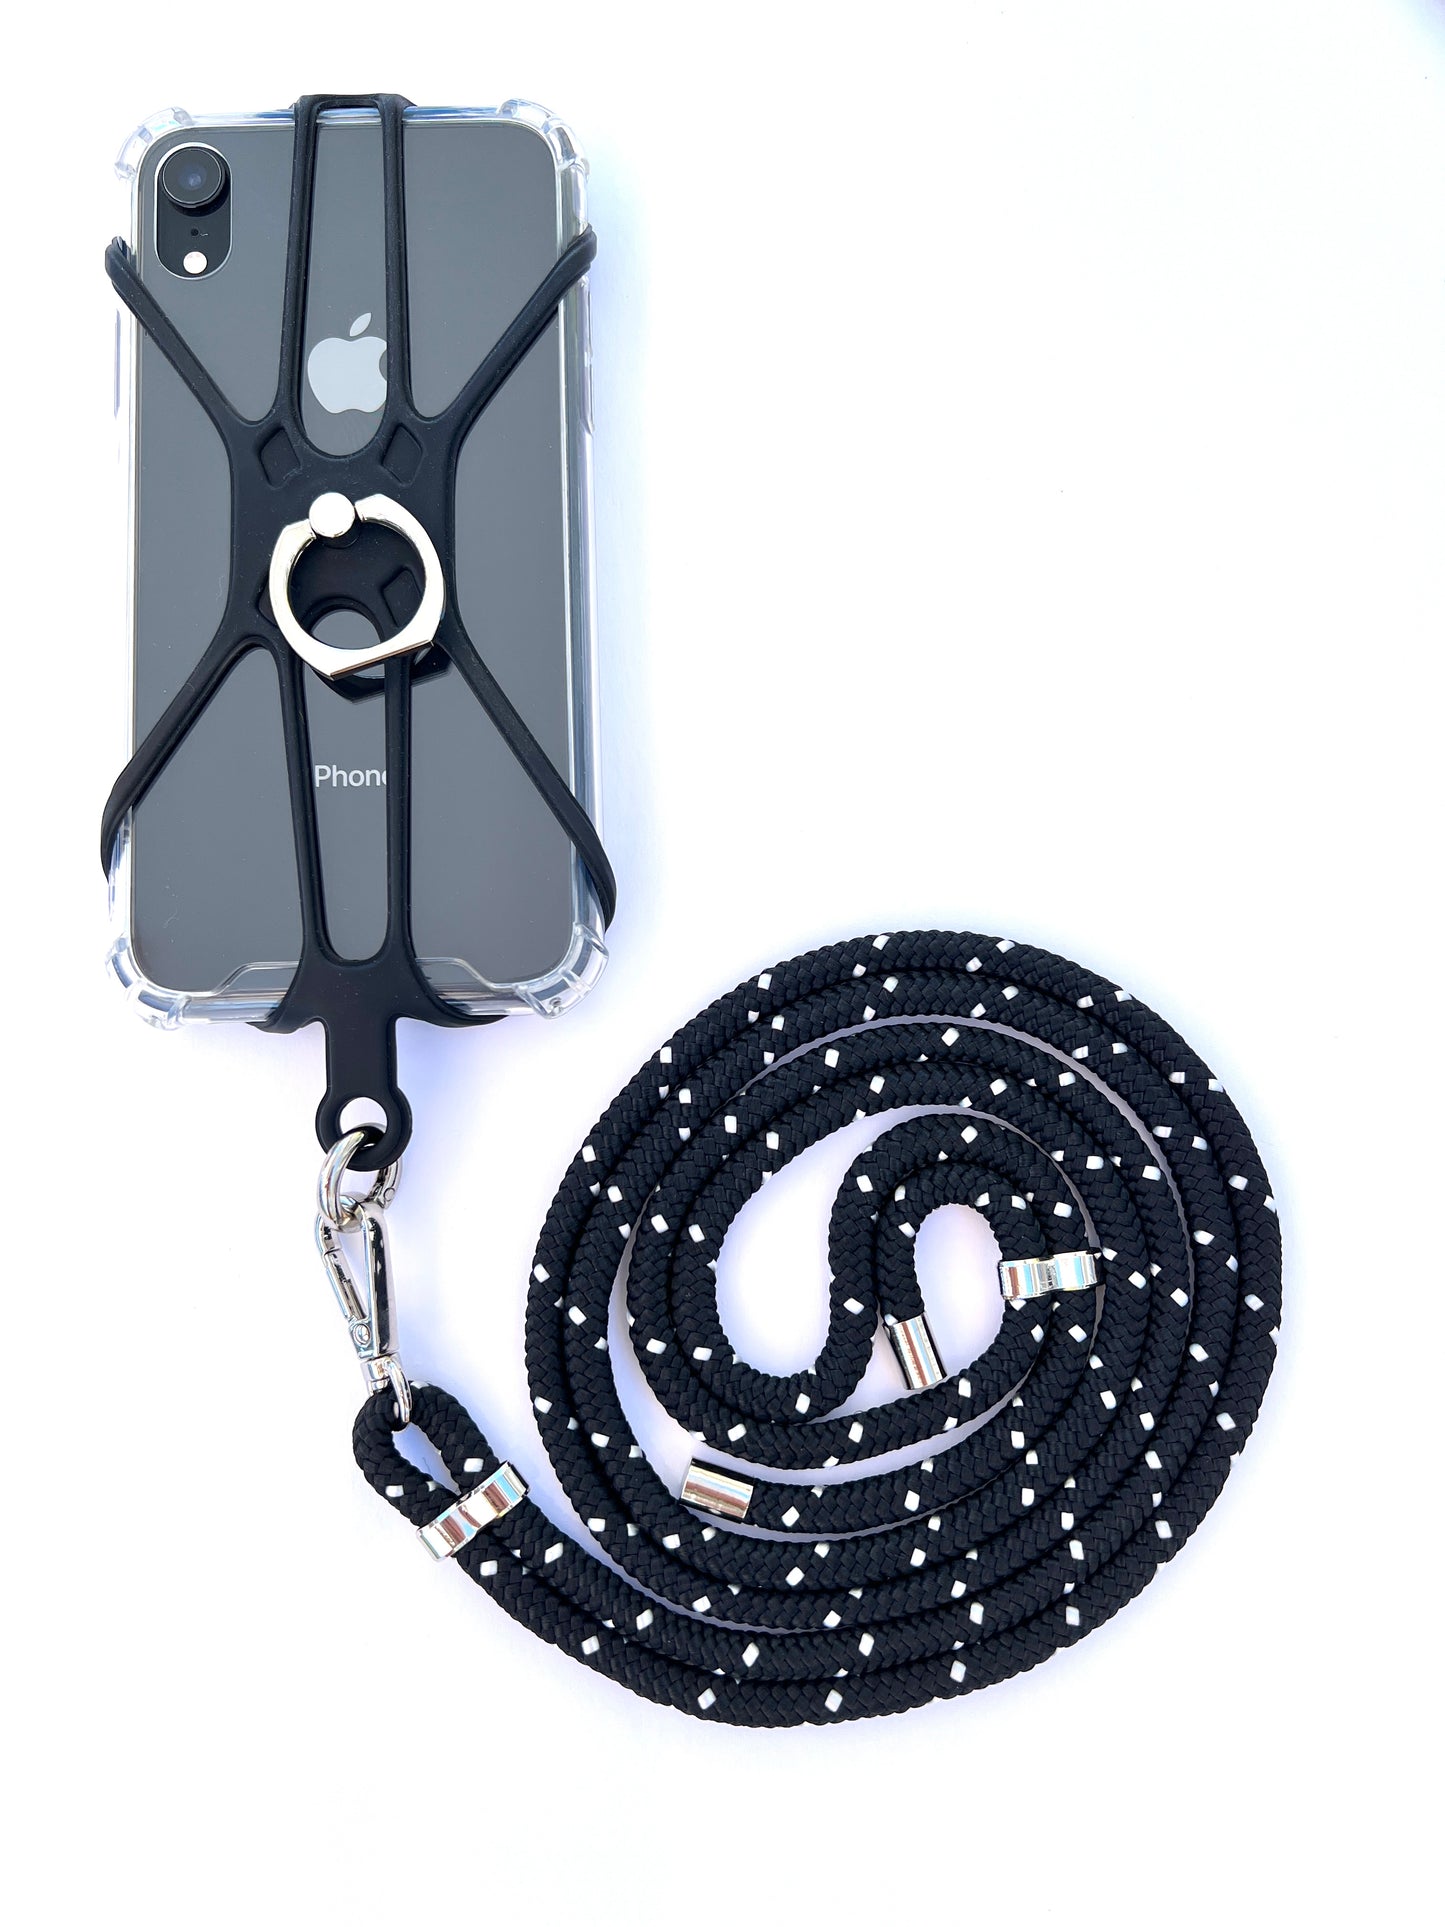 Silicon Holder Phone Strap - Black with White Dots